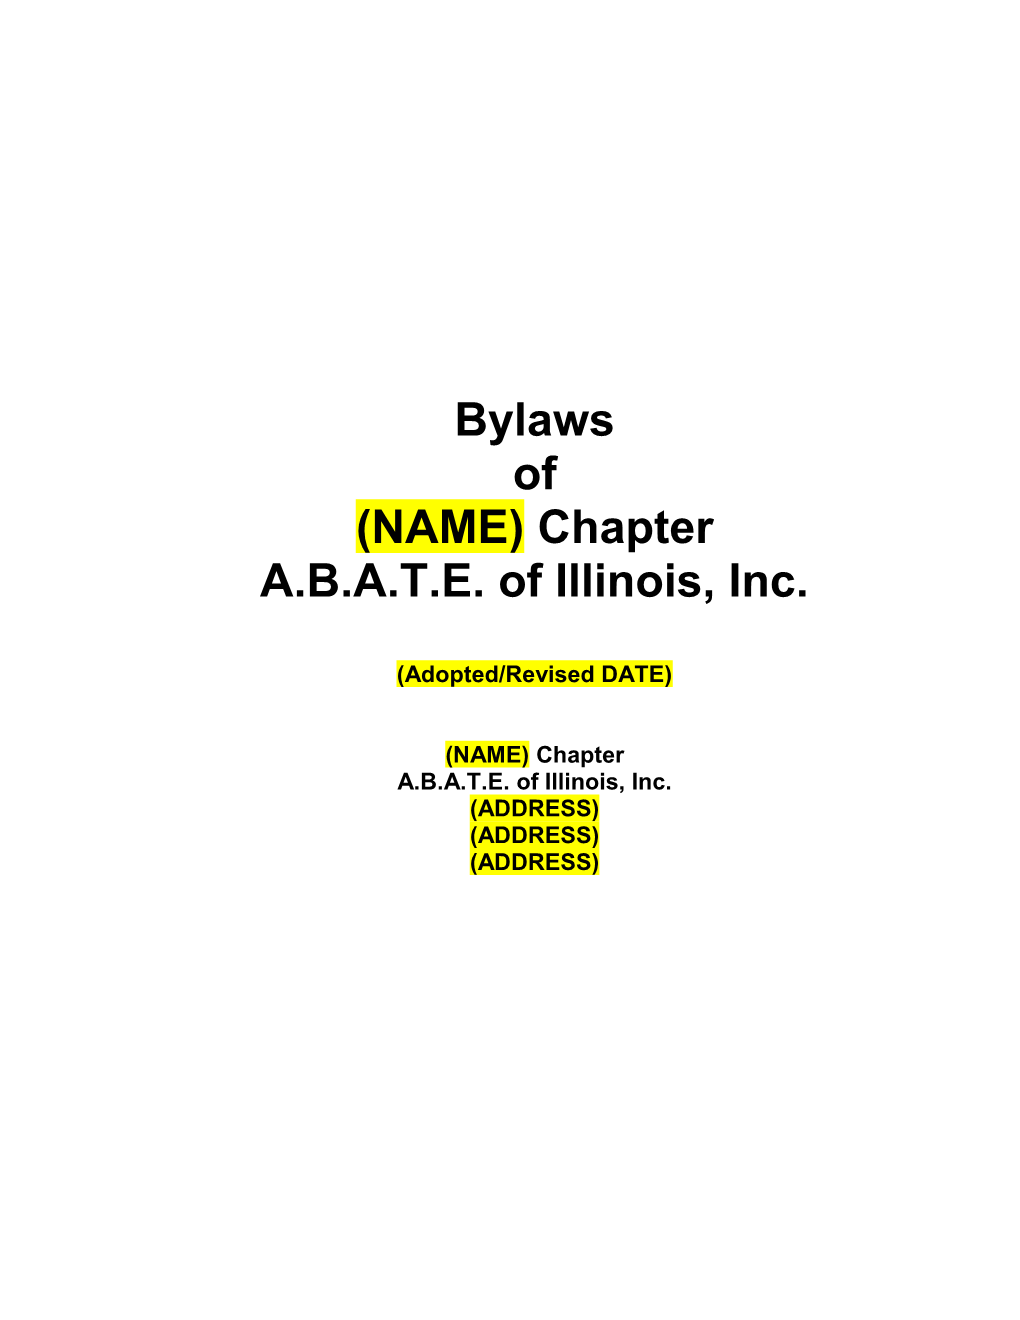 Bylaws of (NAME) Chapter, A.B.A.T.E. of Illinois, Inc